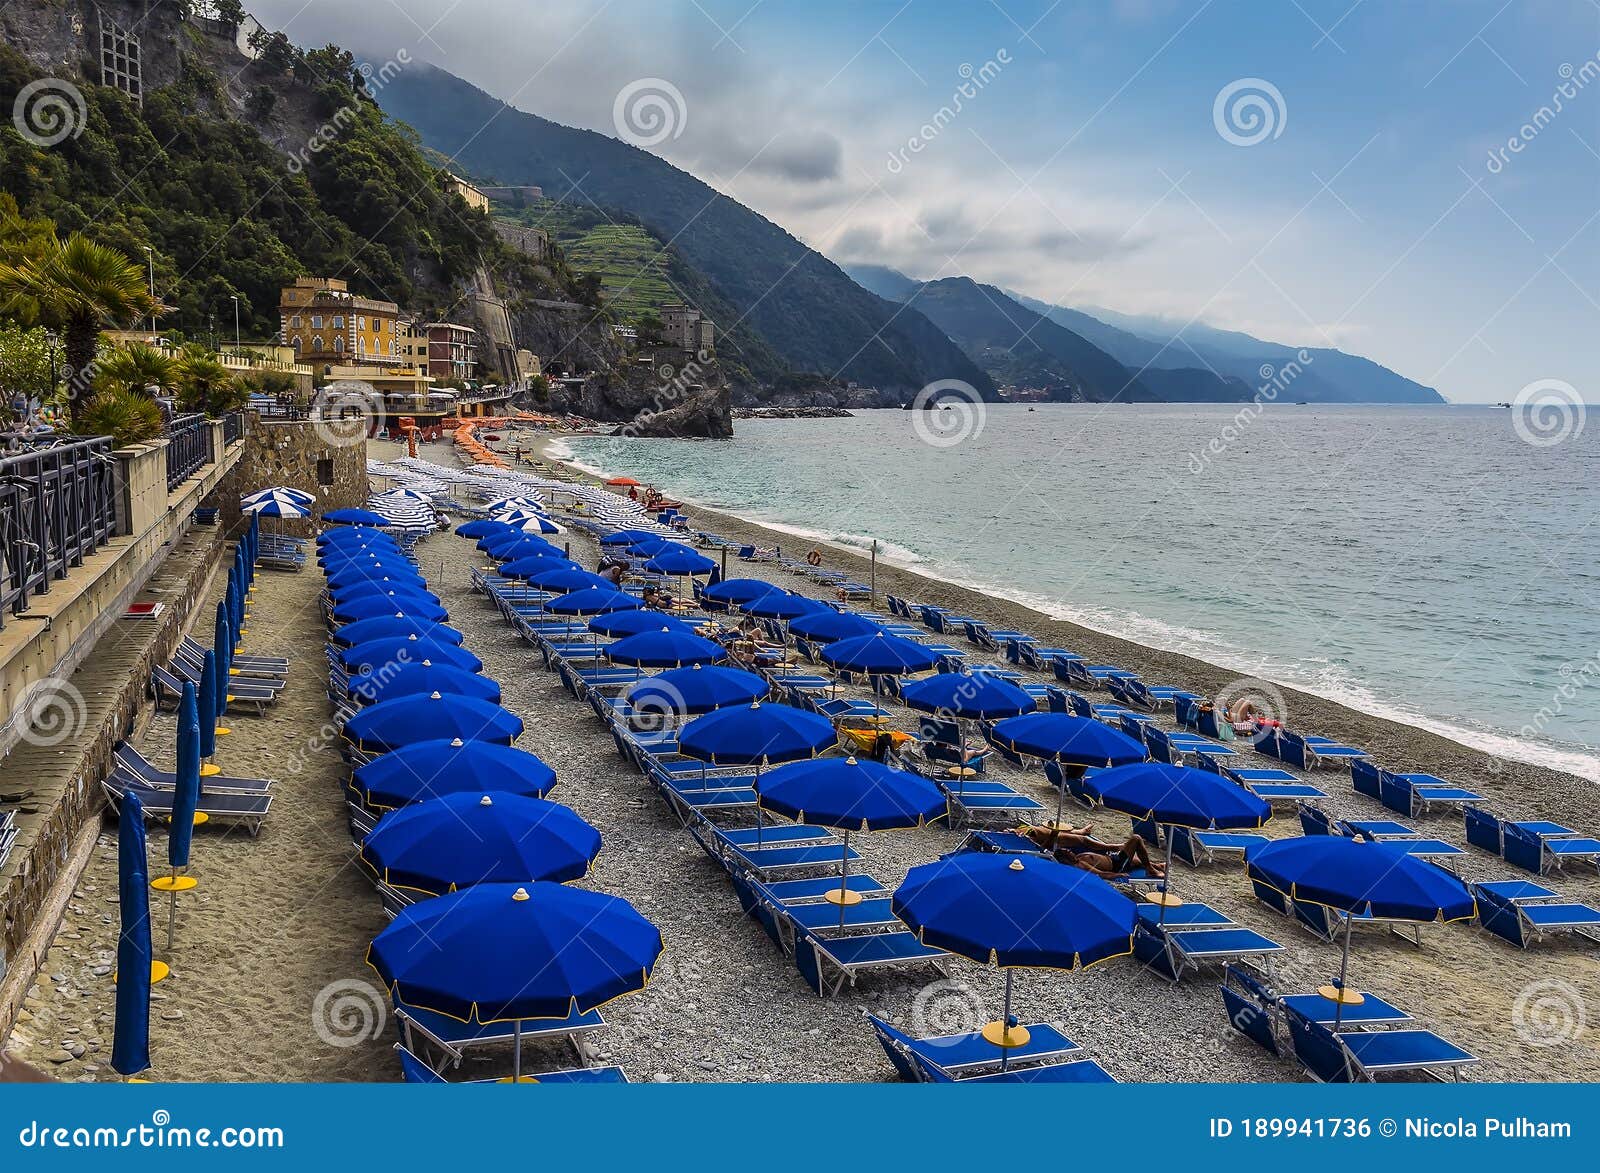 a view along the beach in the early morning at monterosso al mare, italy